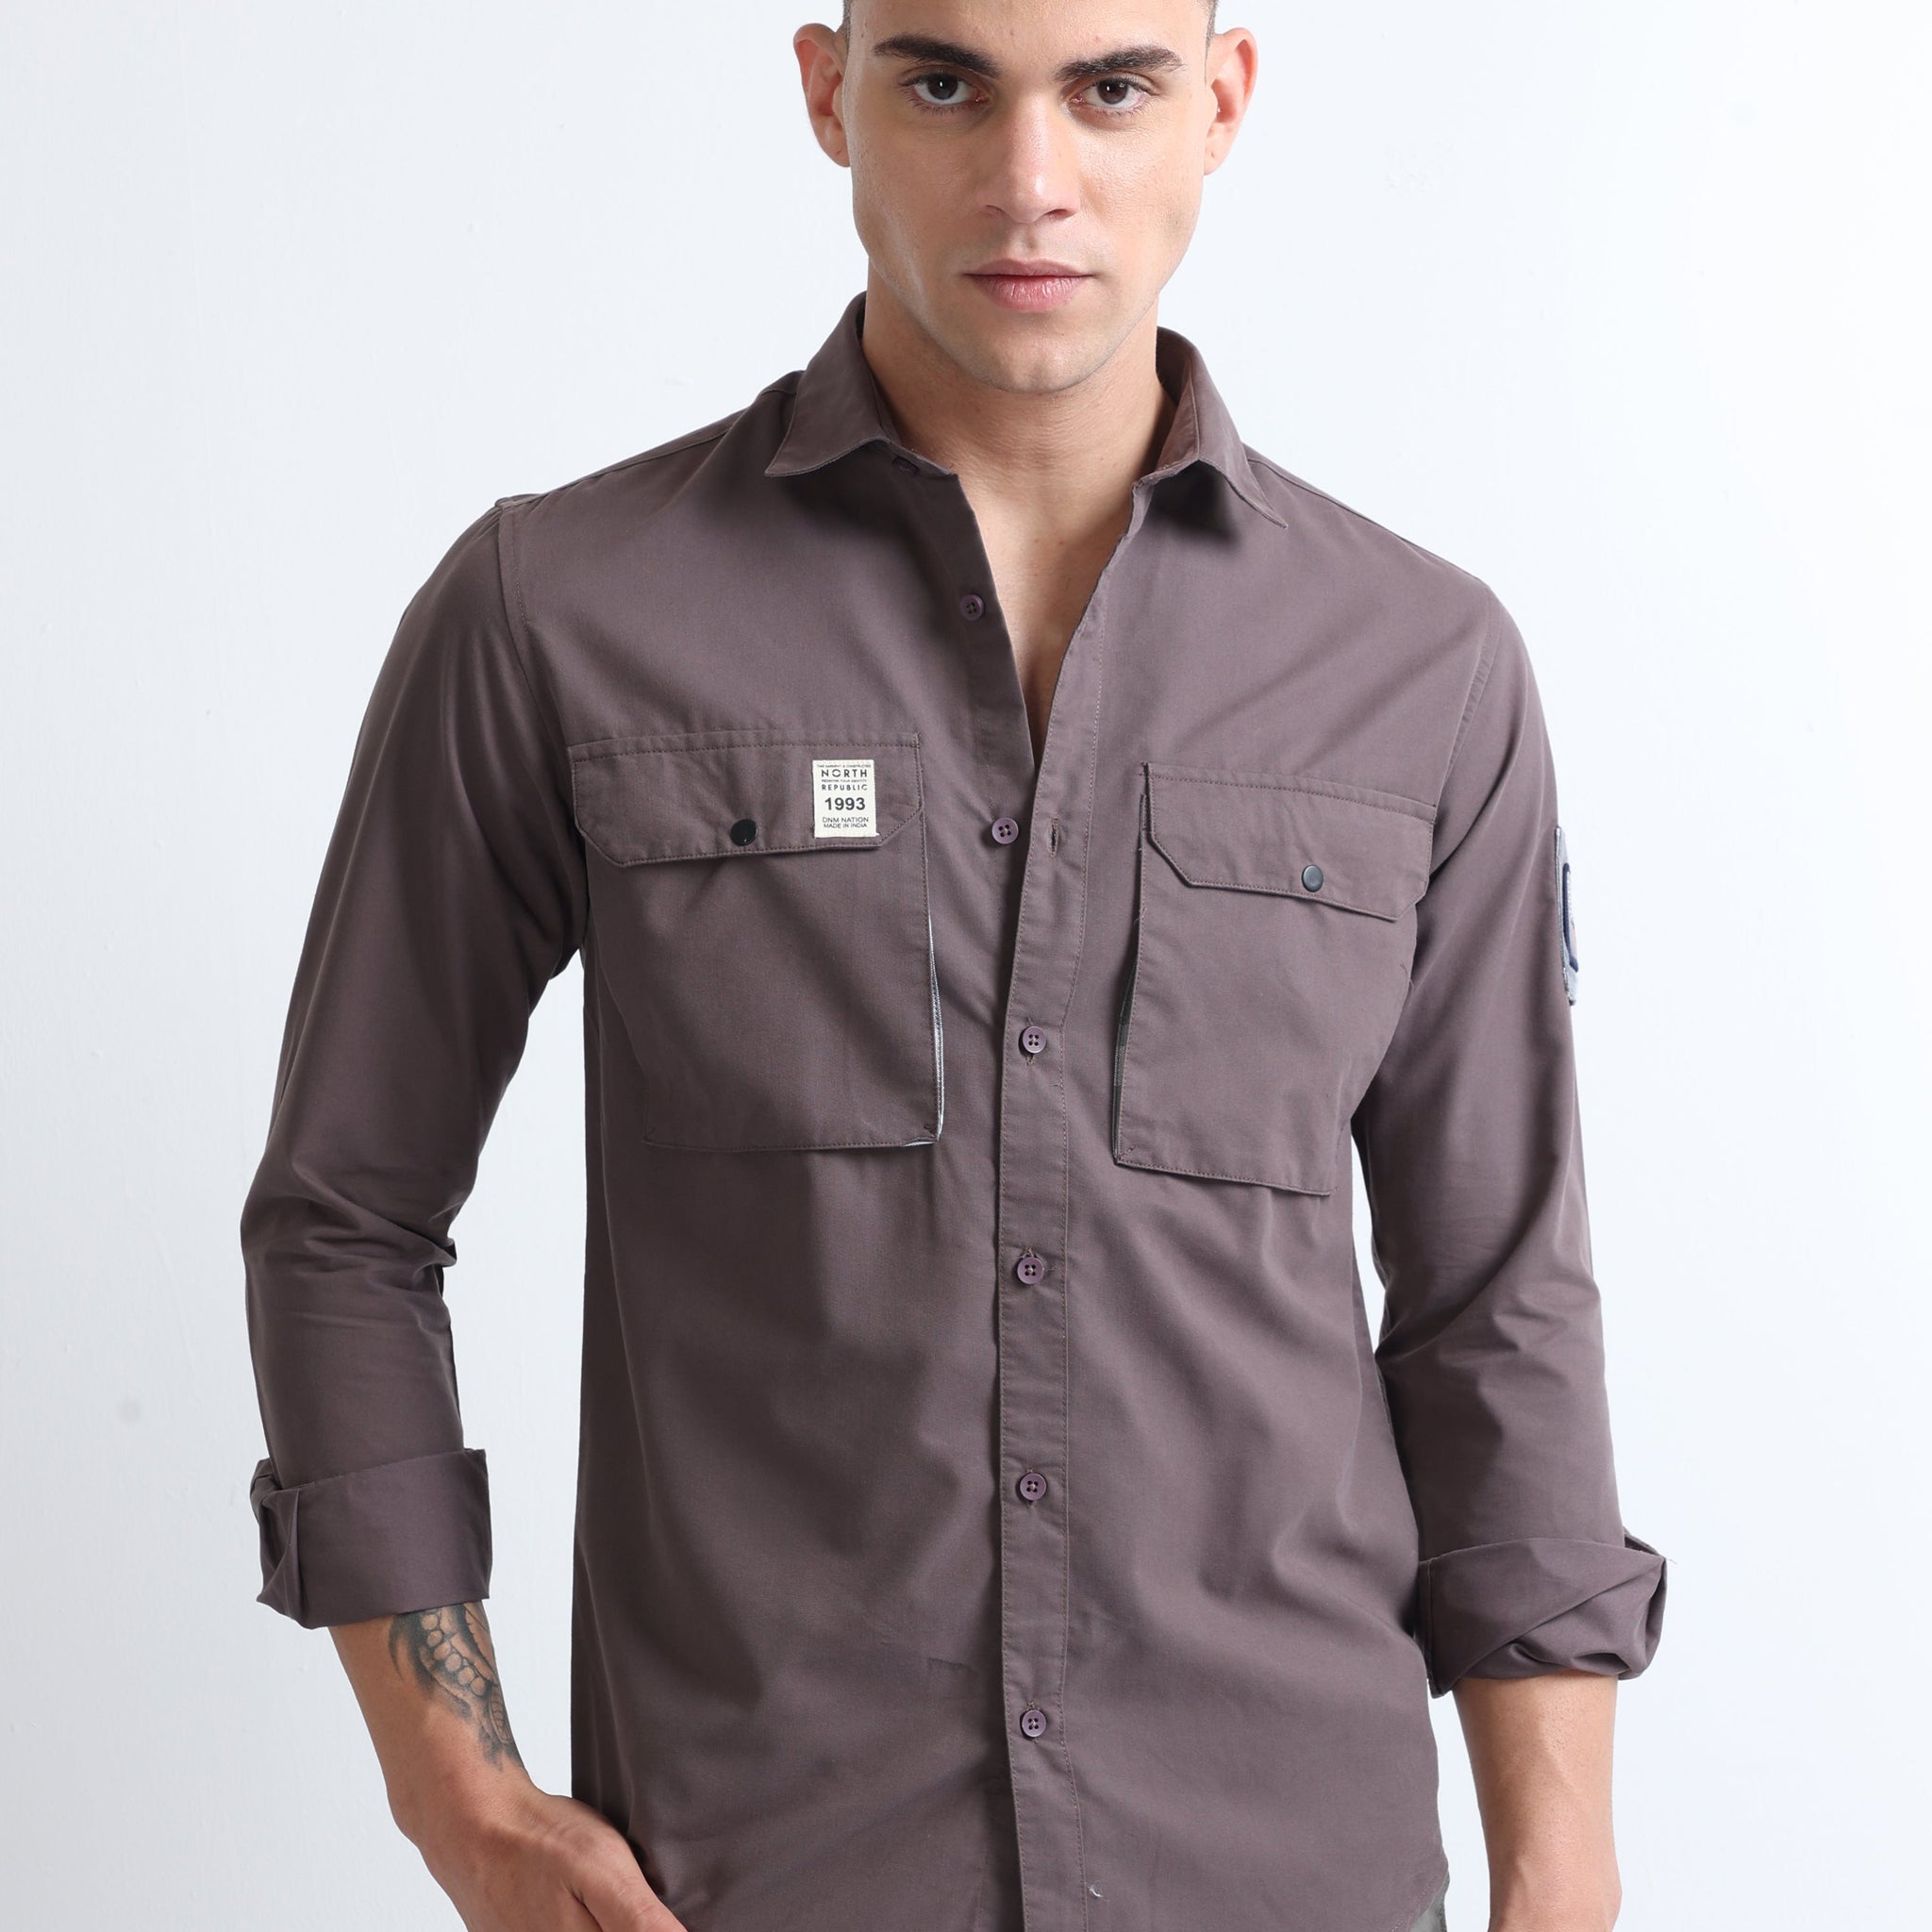 Buy Cargo Double Pocket Fashionable Twill Shirt For Mens Online.